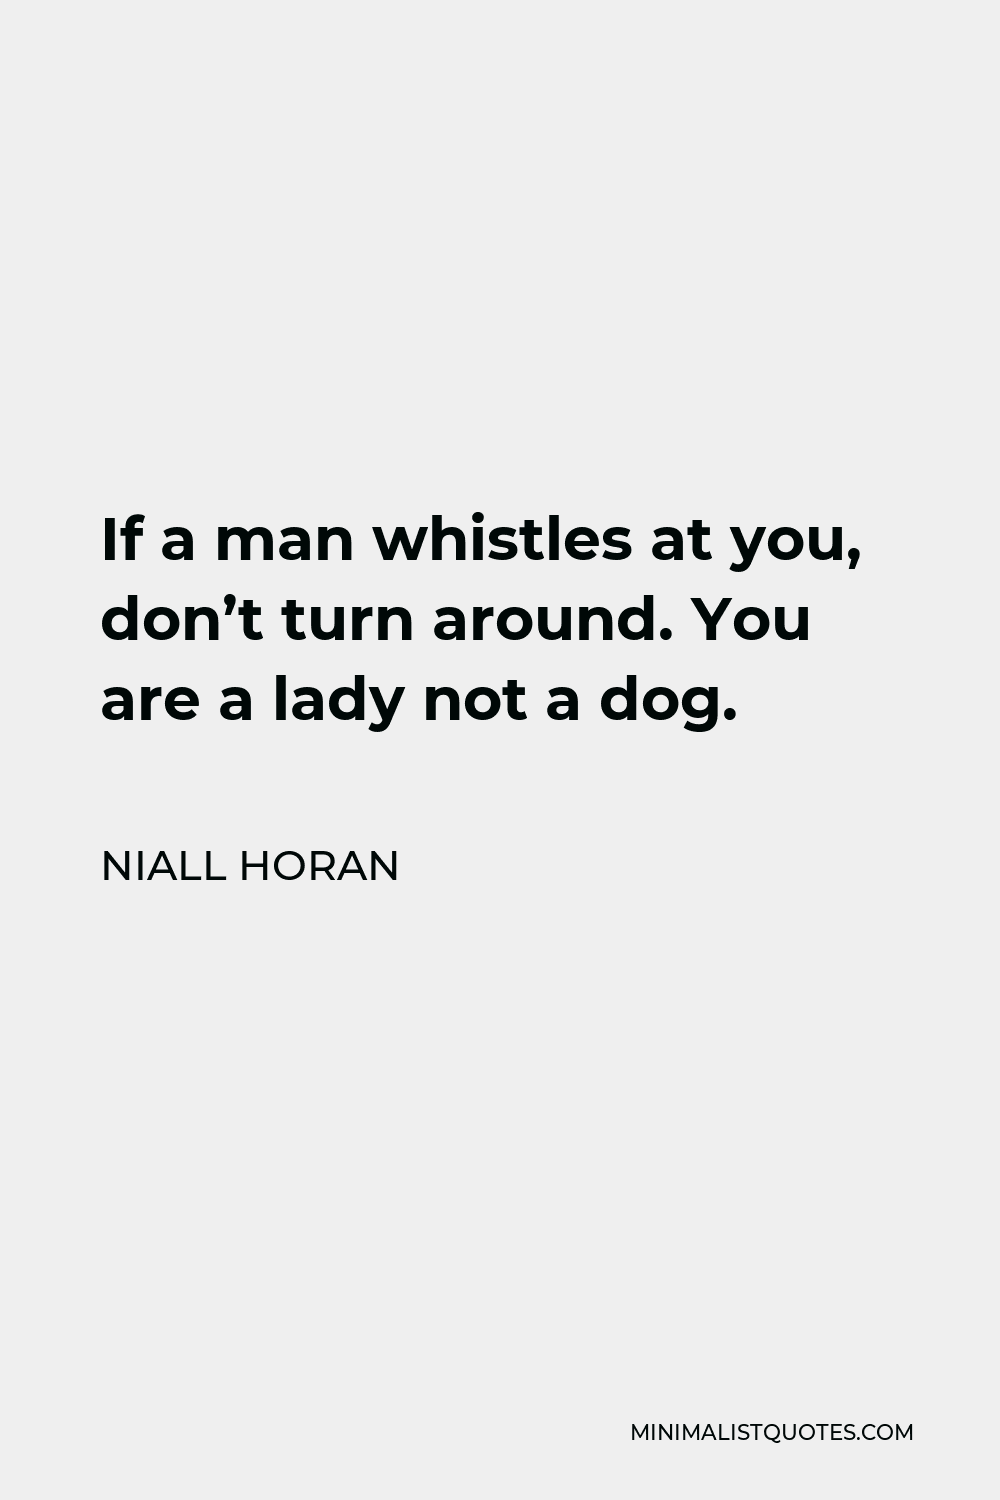 Niall Horan Quote - If a man whistles at you, don’t turn around. You are a lady not a dog.